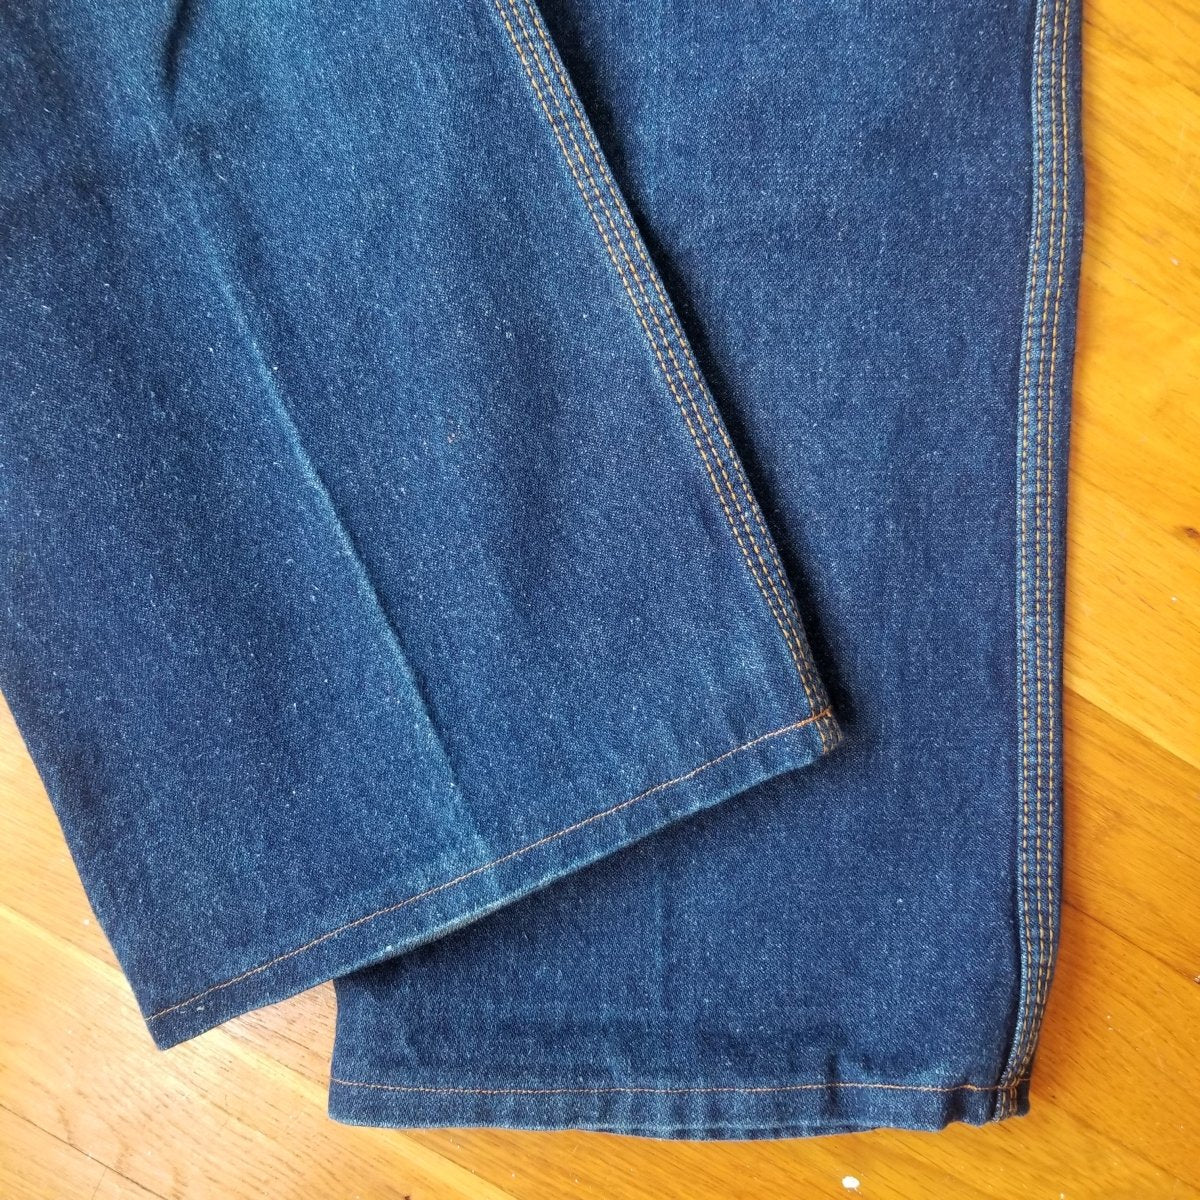 70s/80s Gap Jeans 32x29 - themallvintage The Mall Vintage